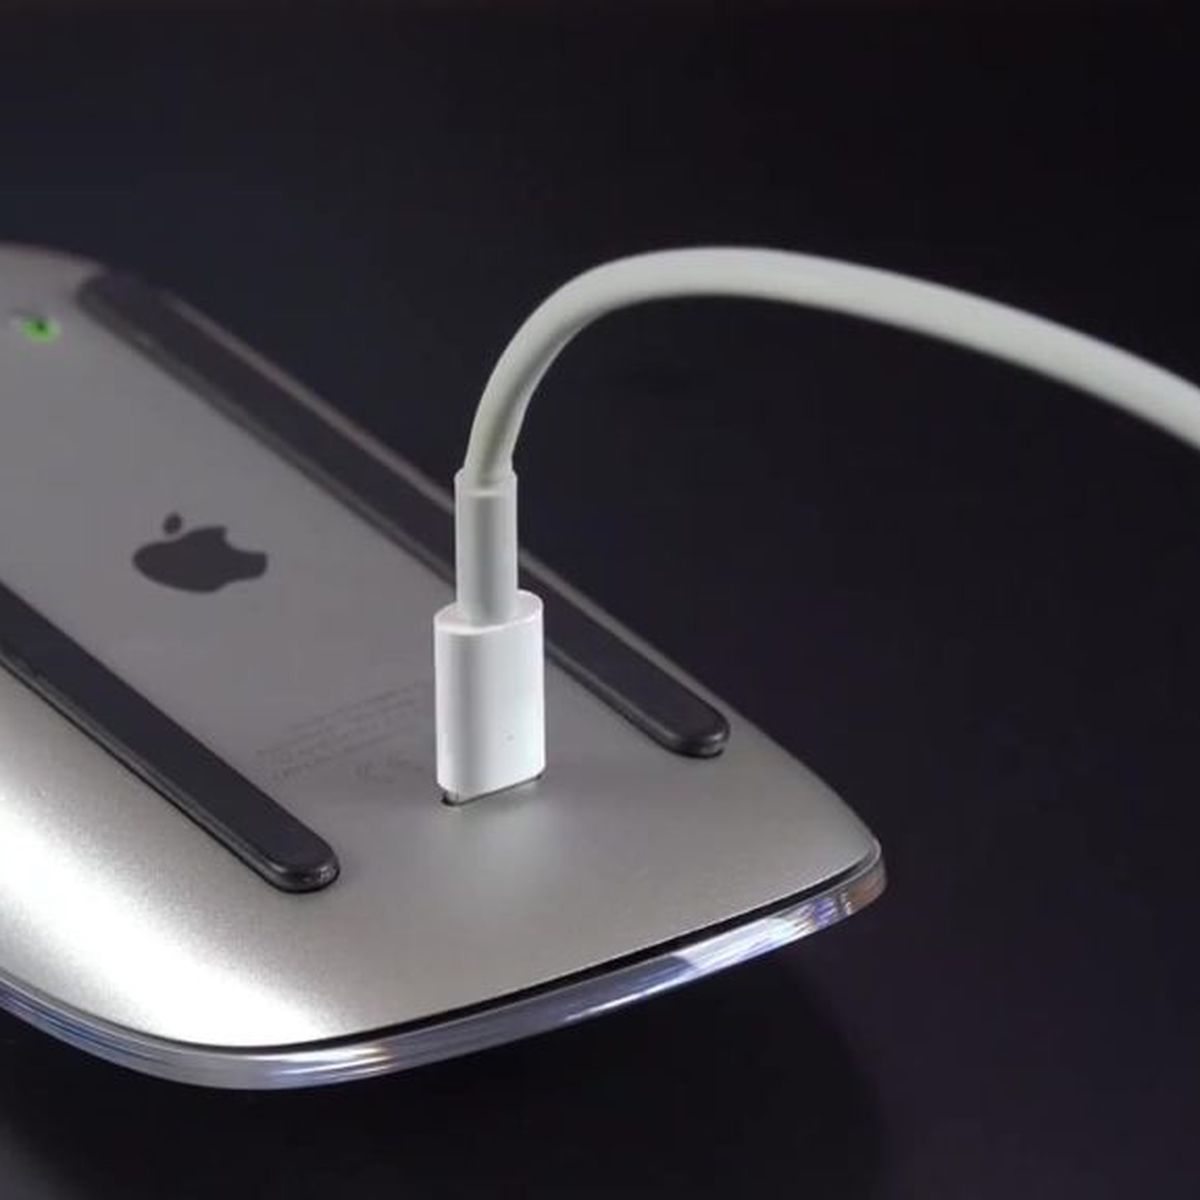 Video: Apple's Lightning-equipped Magic Mouse 2 gets unboxed and